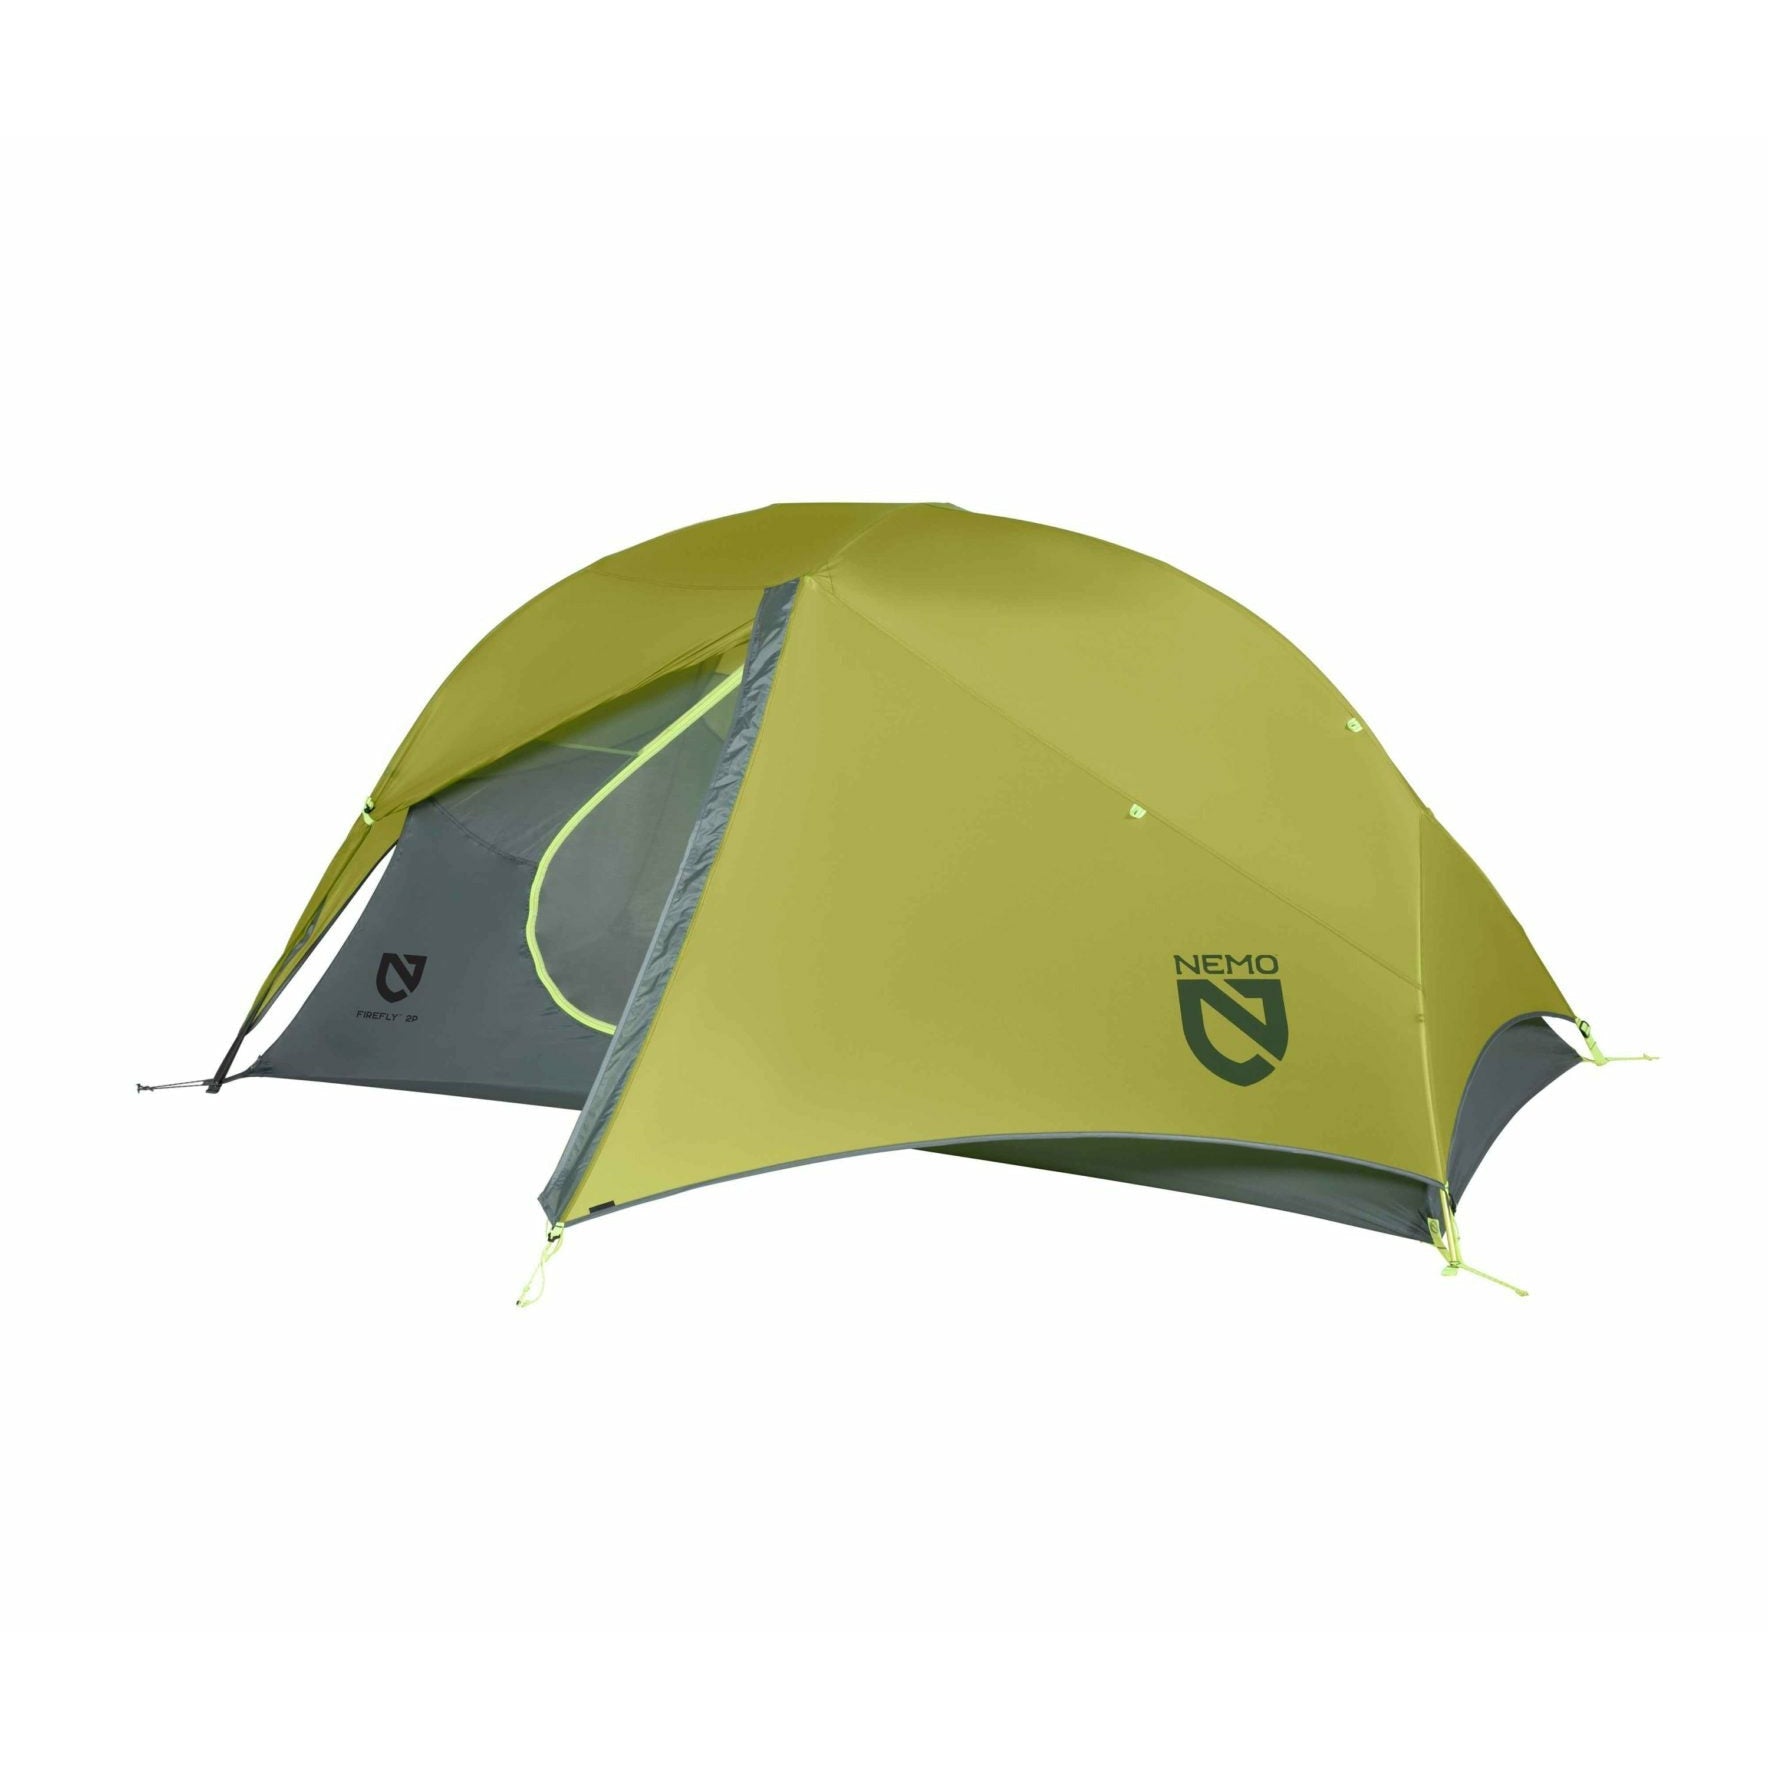 Nemo Firefly 2 Person Backpacking Tent